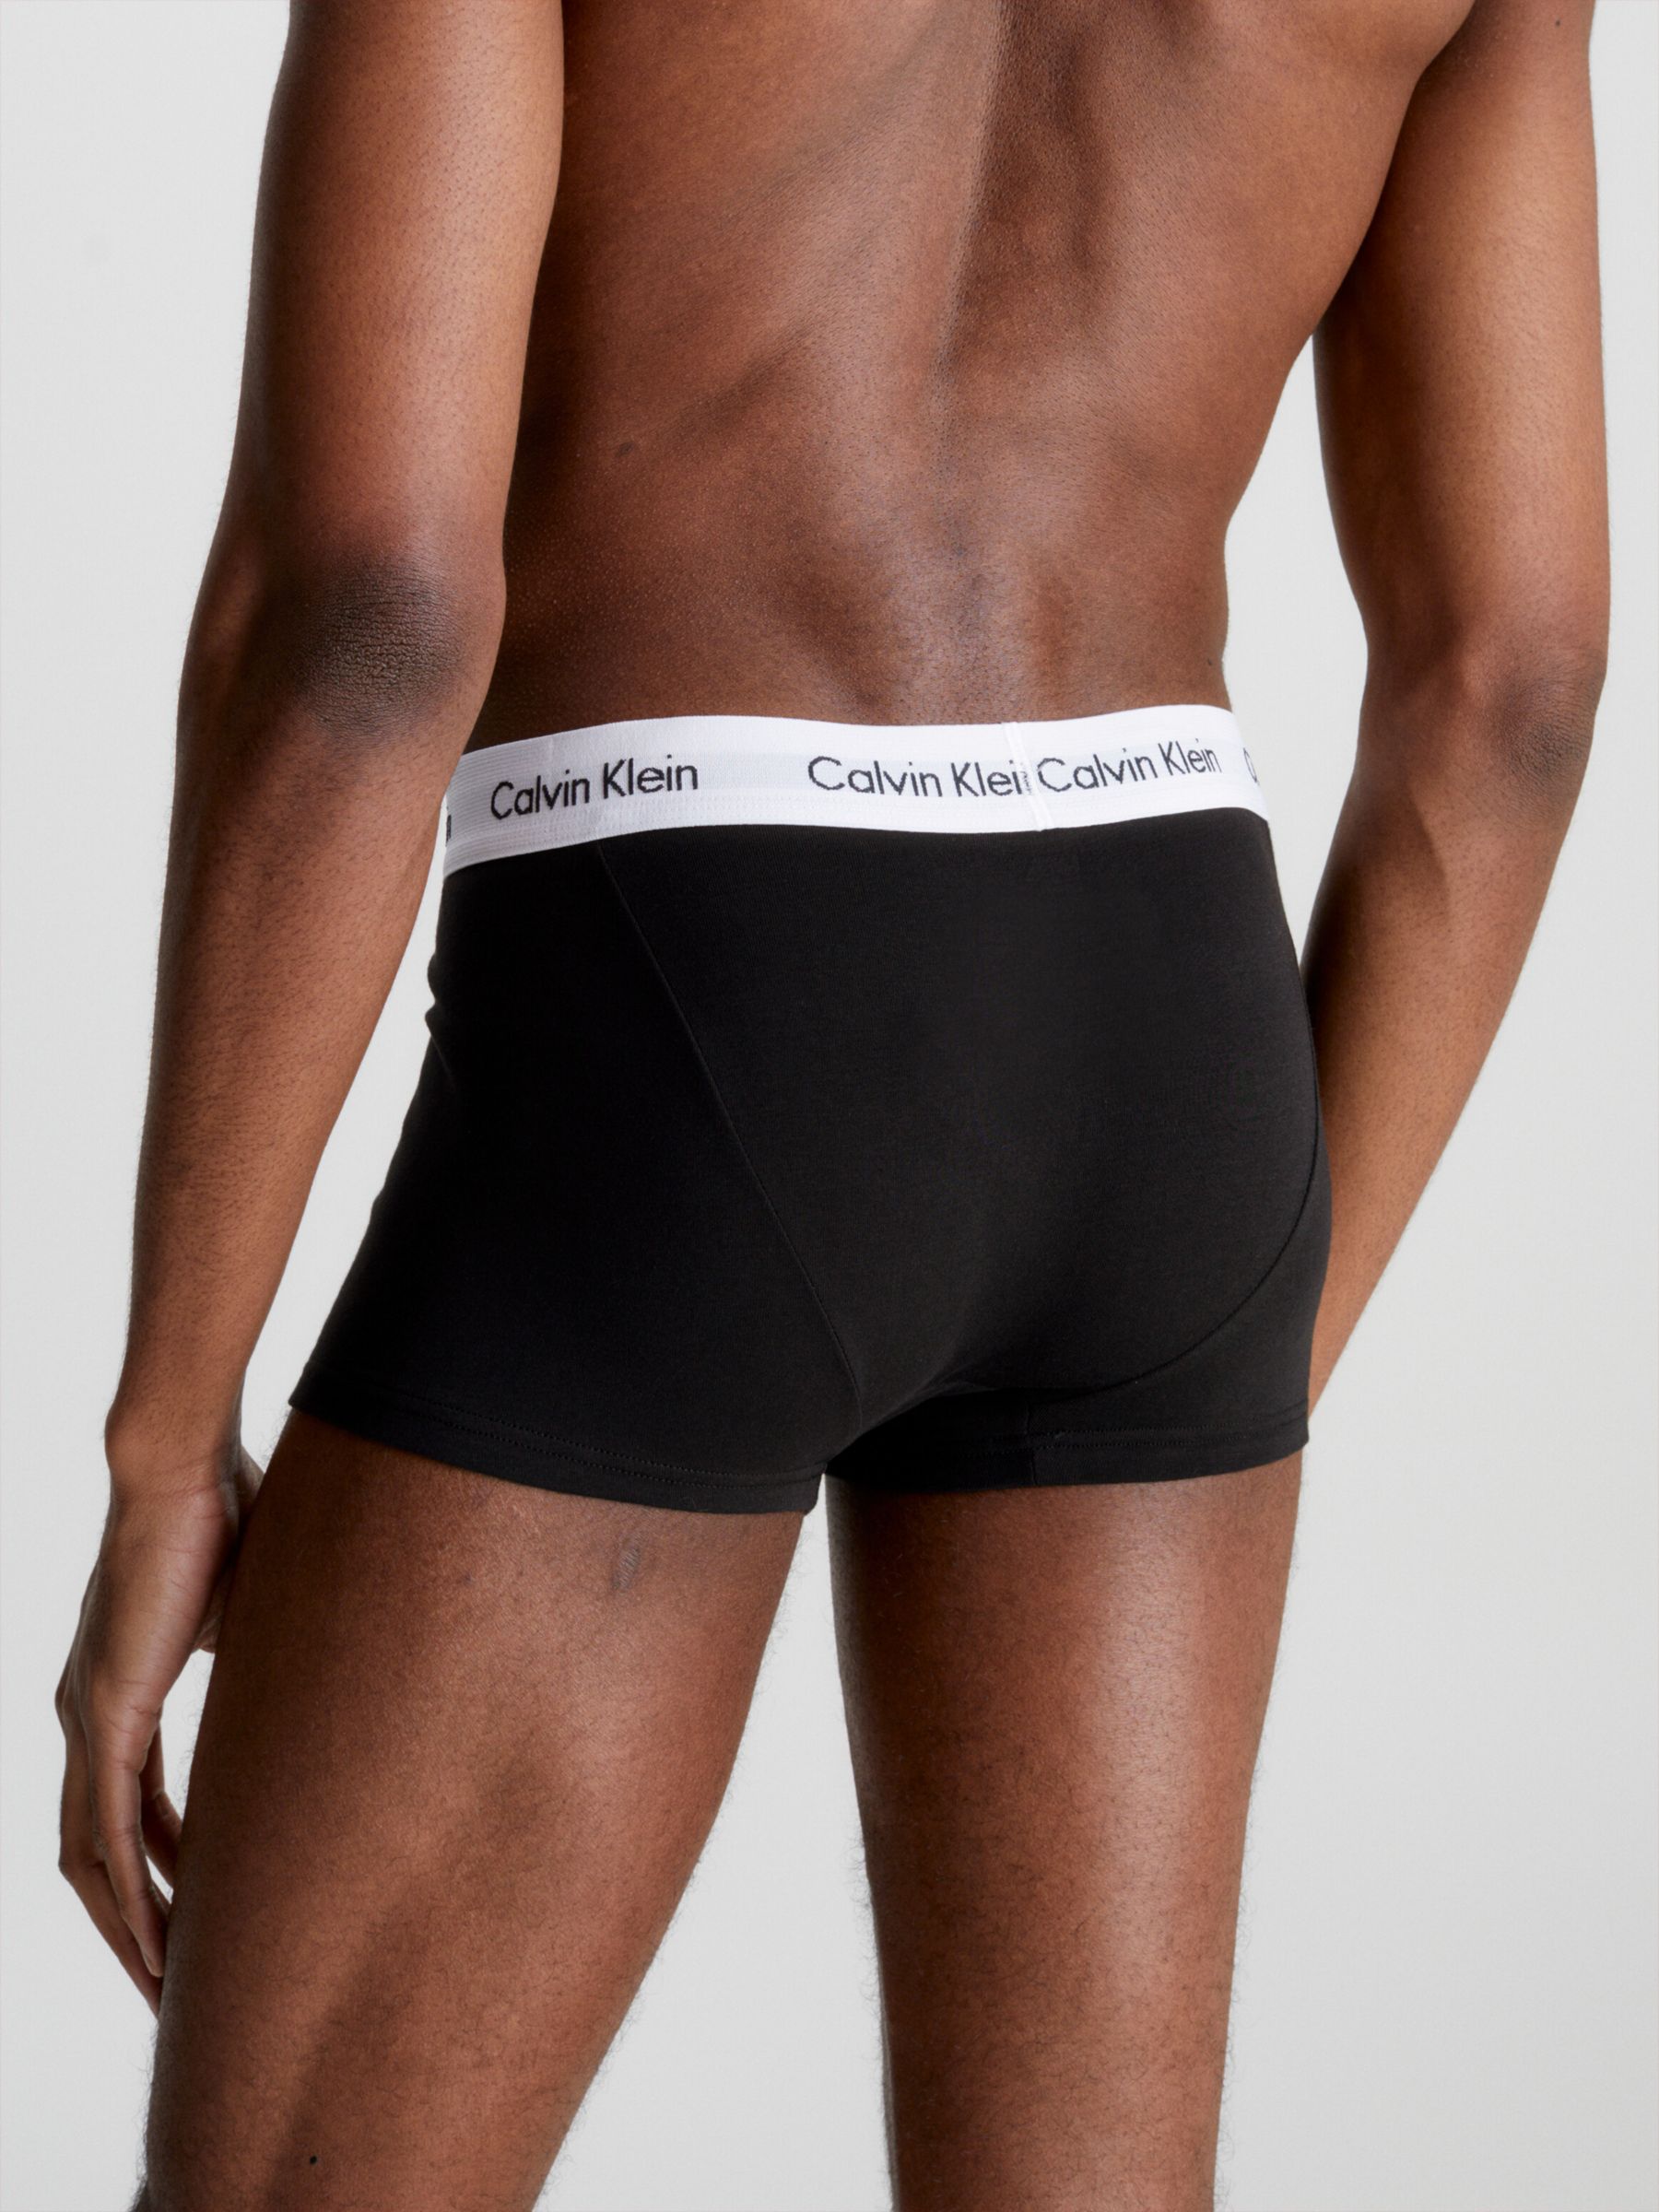 Calvin Klein Low Rise Cotton Stretch Trunks, Pack of 3, Black, XS